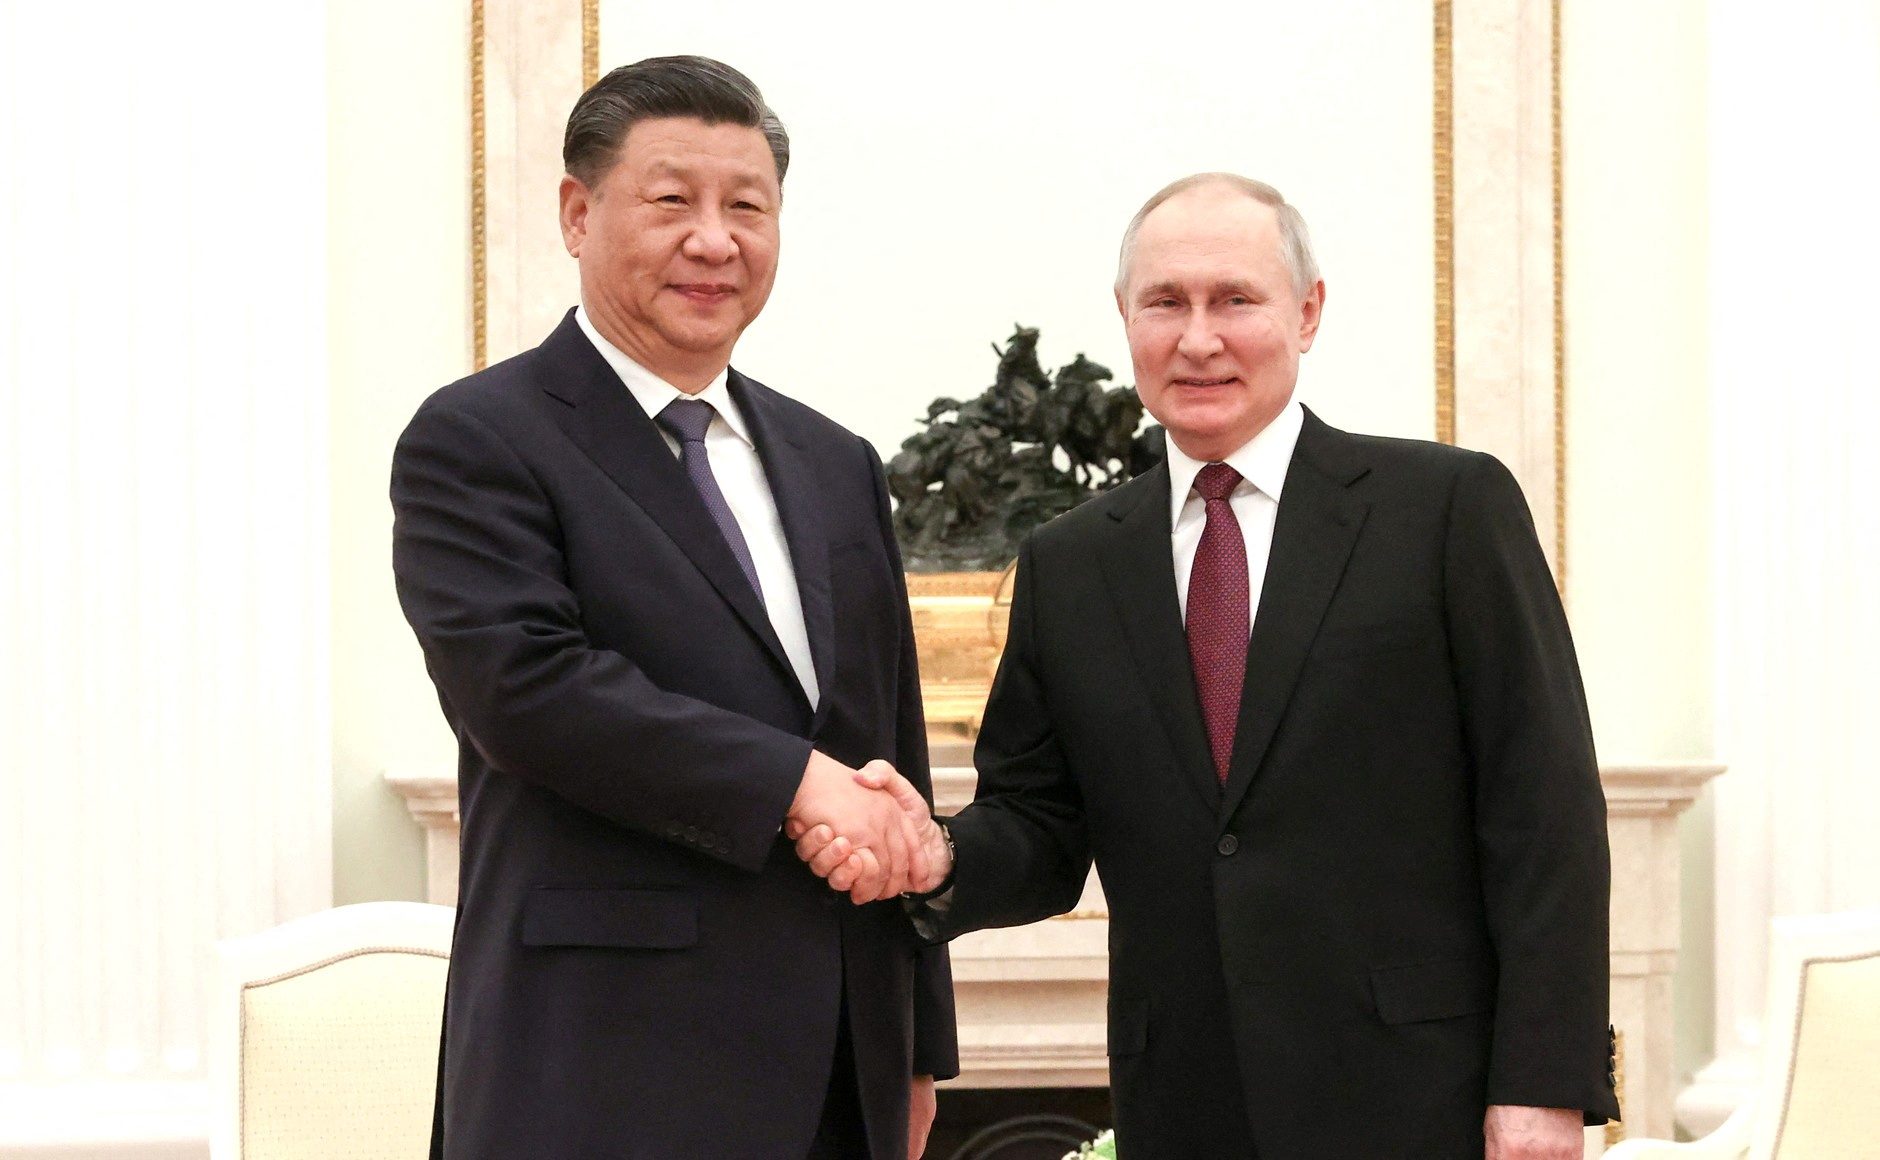 Russian President Vladimir Putin, right, and Chinese President Xi Jinping attend a meeting at the Kremlin in Moscow, Russia, on March 20.